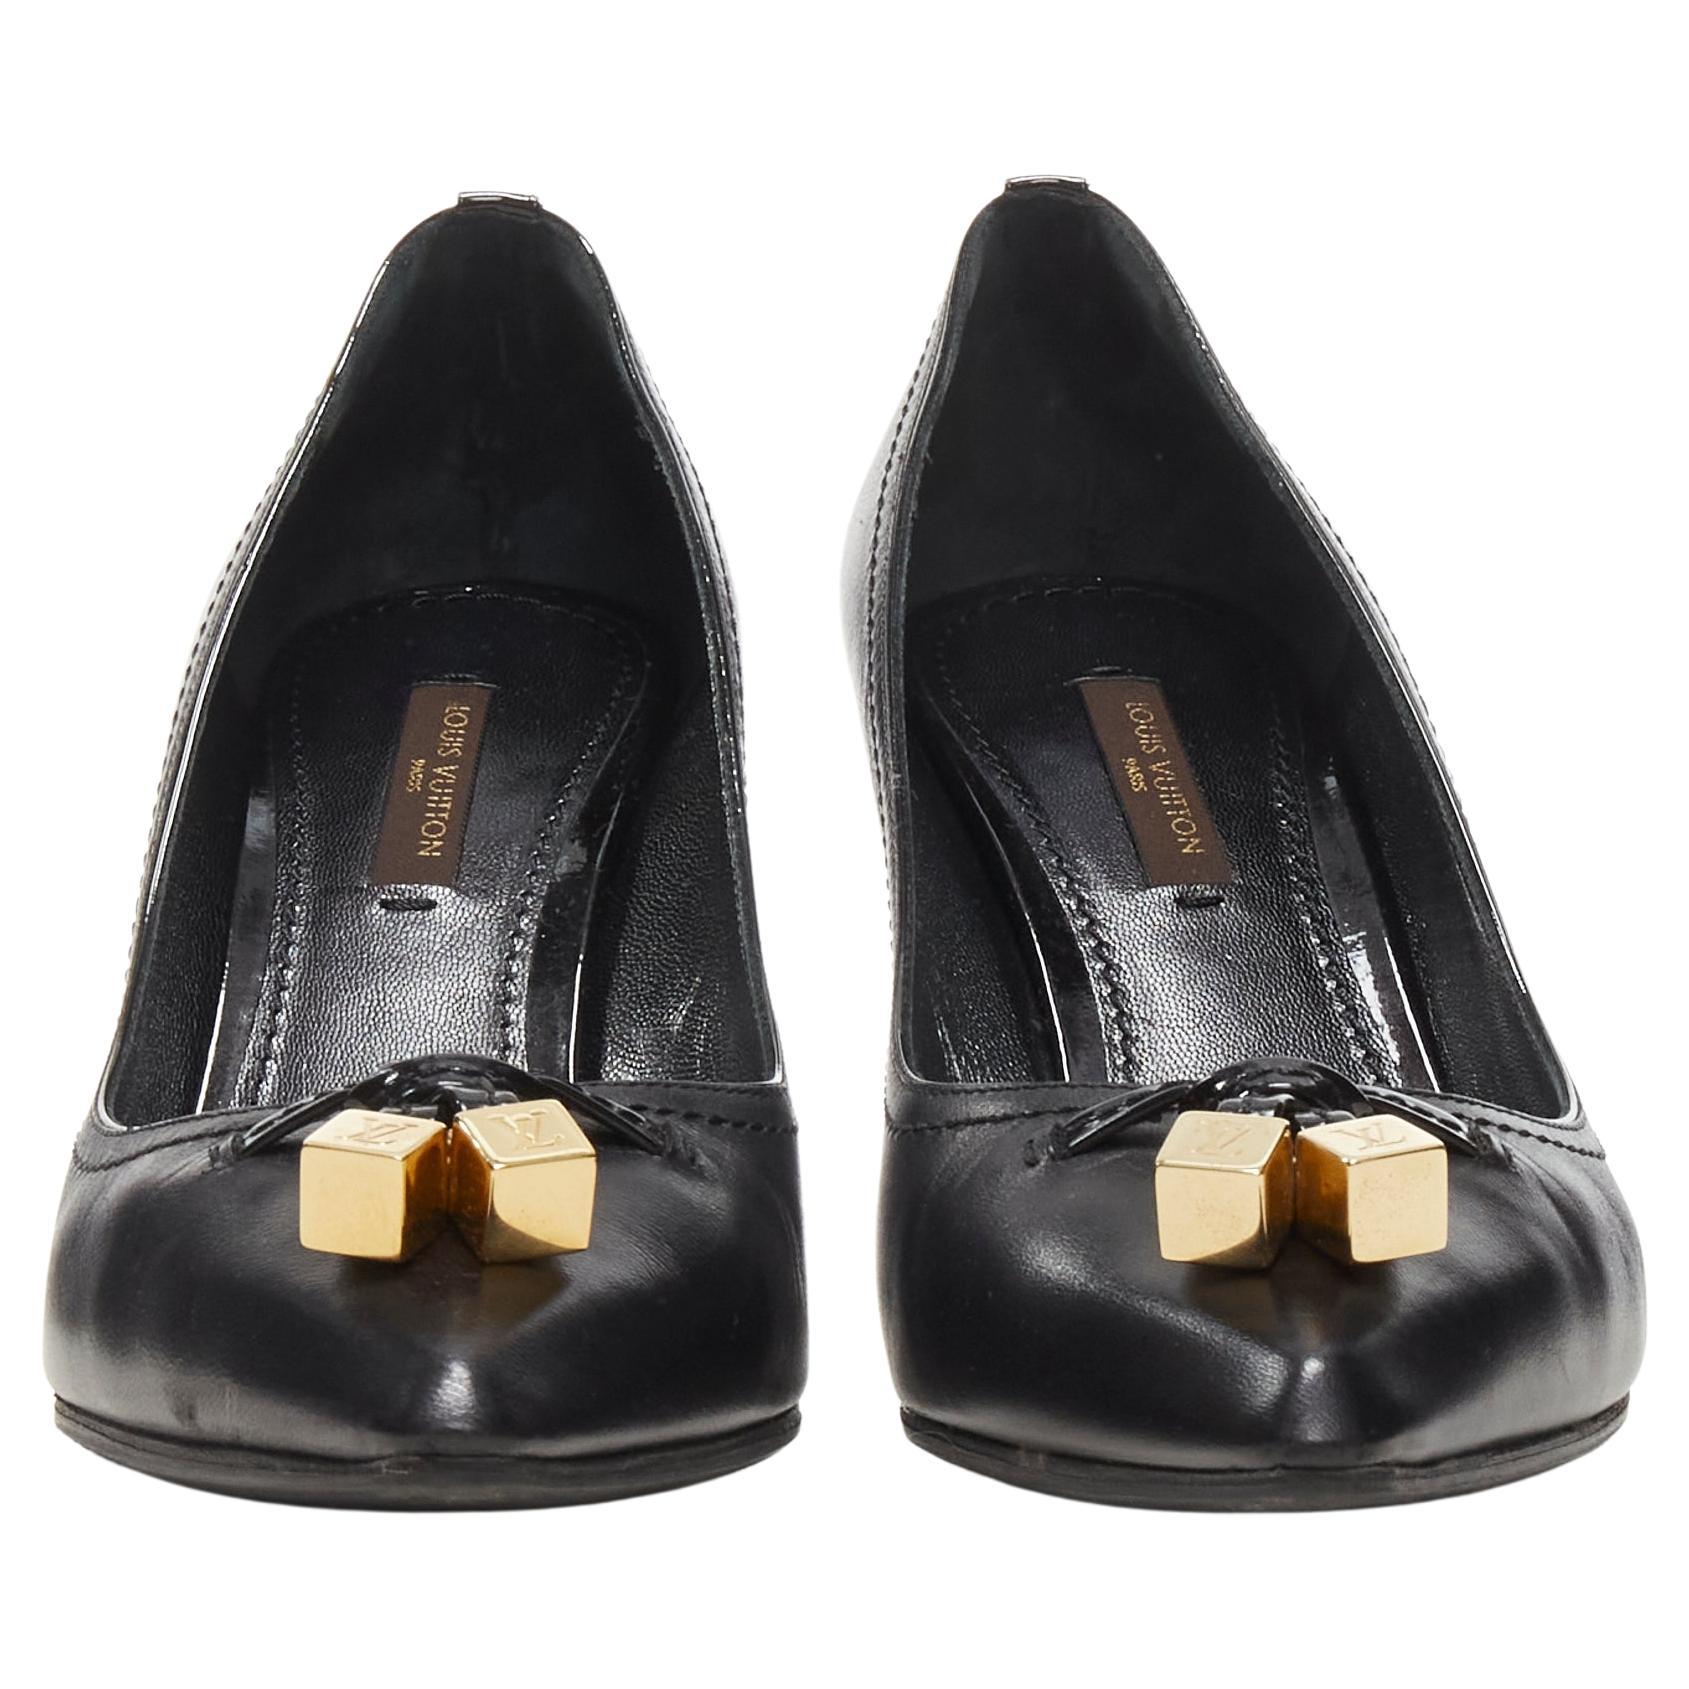 LOUIS VUITTON gold LV dice charm black leather mid heel pump EU36.5
Brand: Louis Vuitton
Material: Leather
Color: Black
Pattern: Solid
Extra Detail: Gold-tone dice charm at vamp. Stacked wooden high heel.
Made in: Italy

CONDITION:
Condition: Very